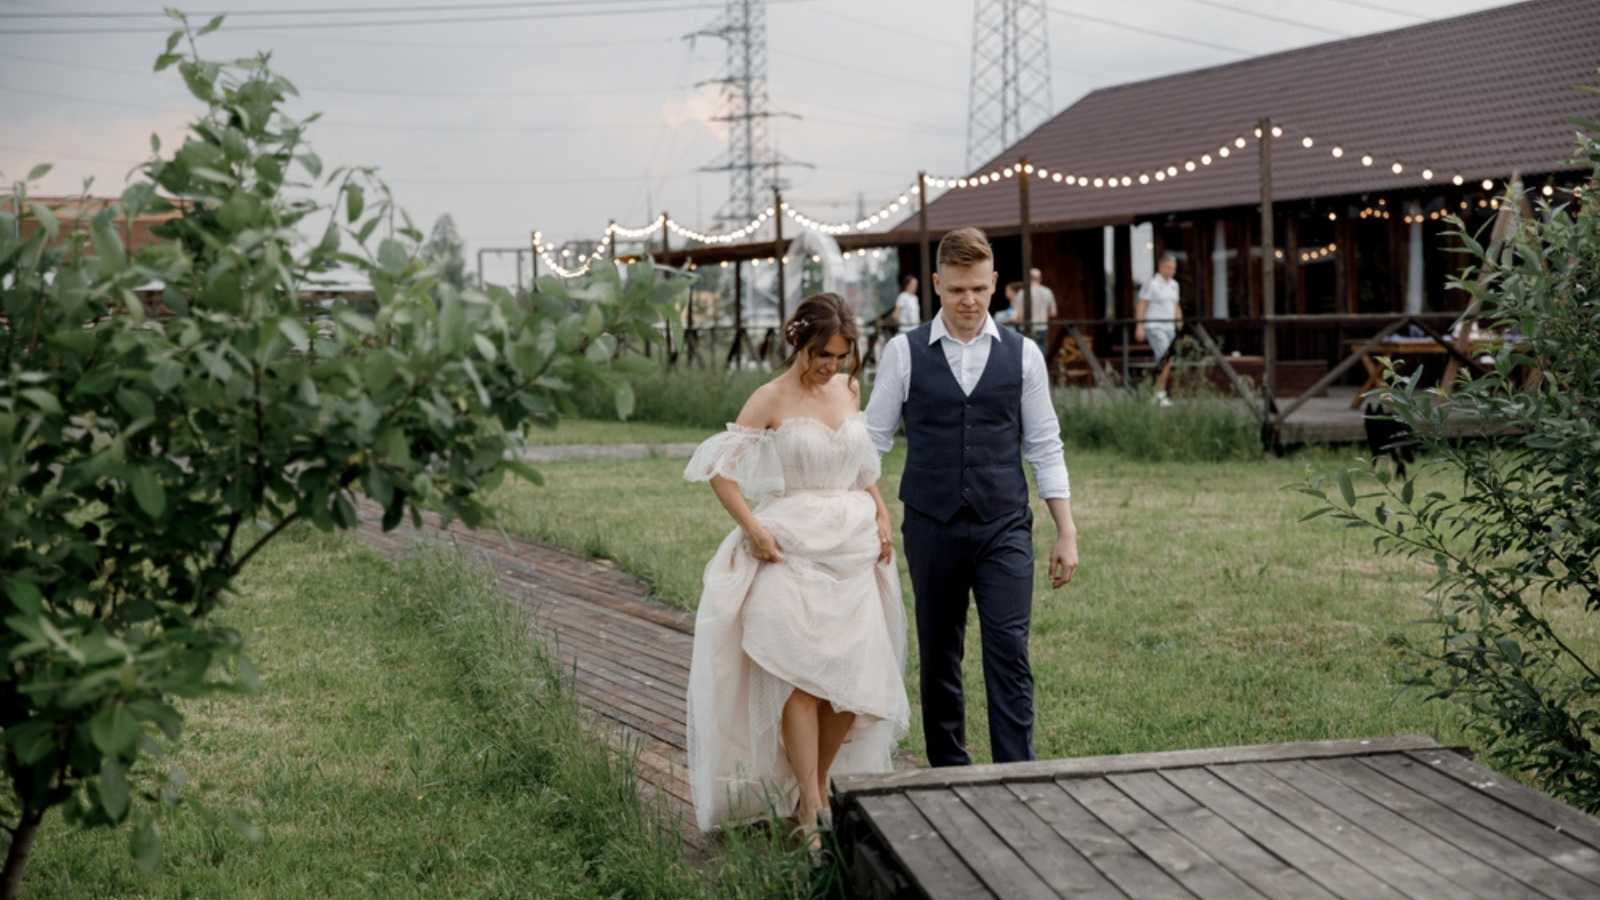 Wedding couple bride and groom walk against wooden barn of stormy sky Rustic country eco-friendly wedding. Copy space for design and advertisement